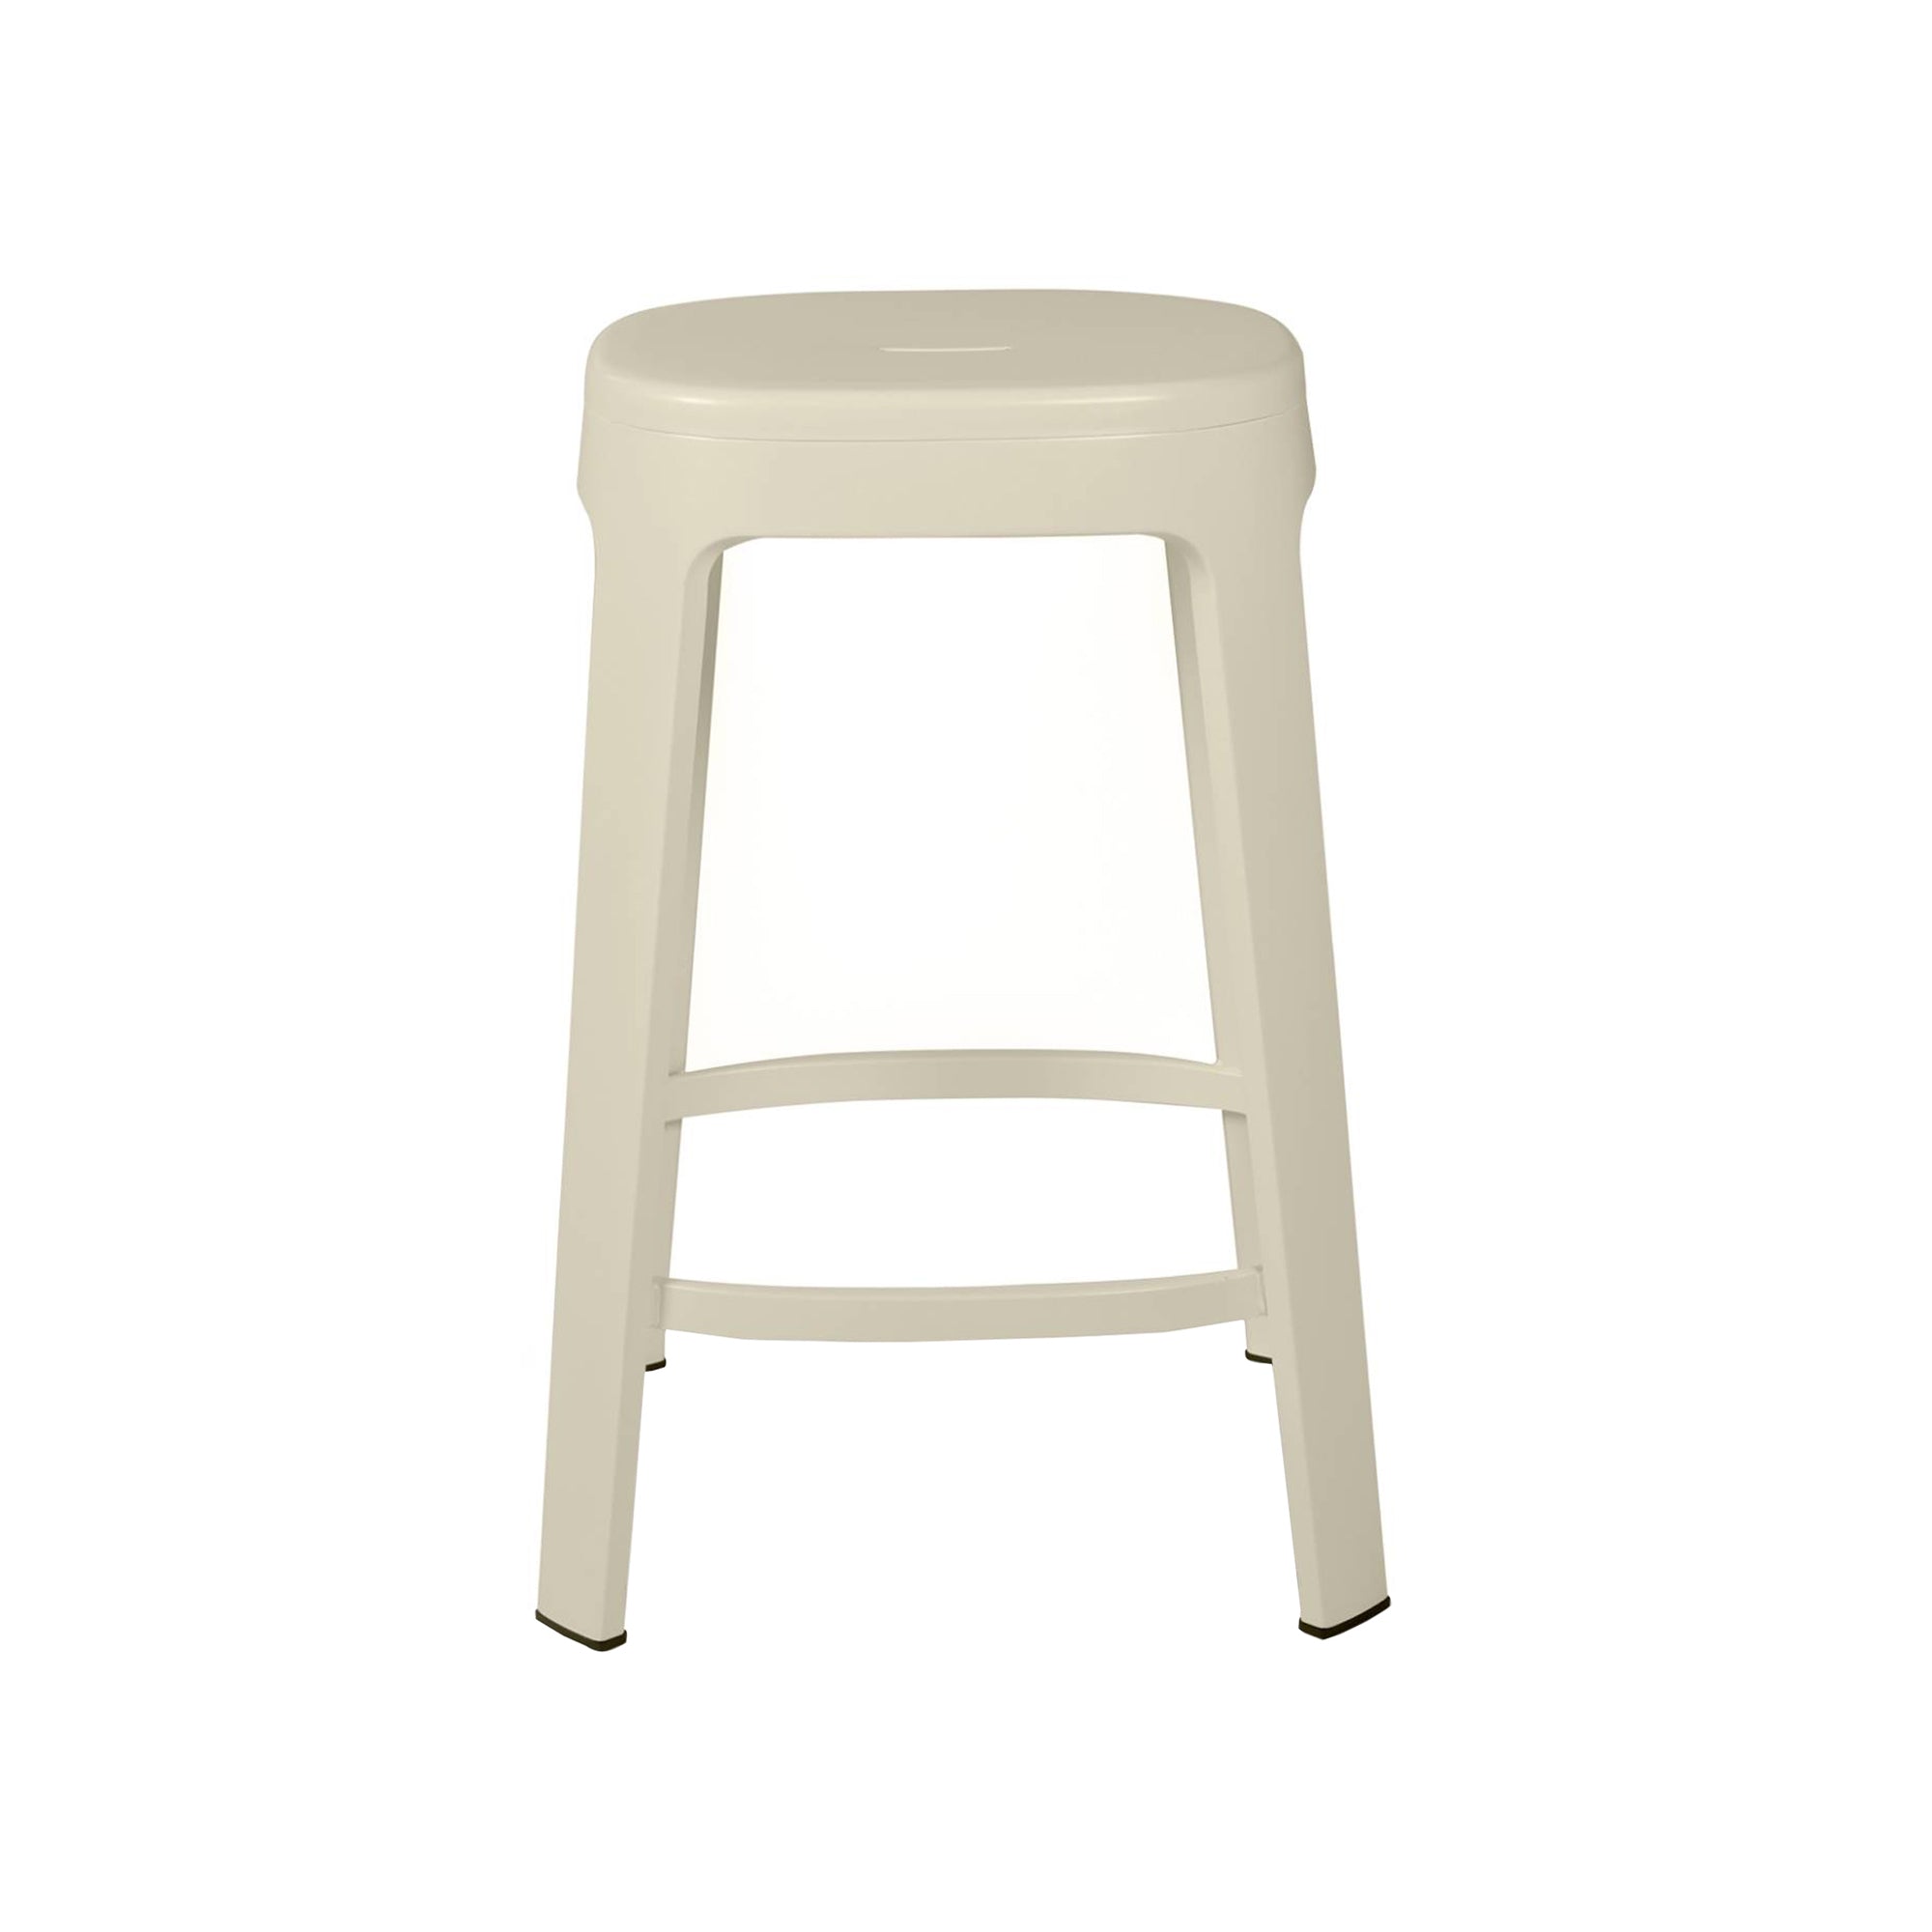 Ombra Bar + Counter Stool: Stacking + Counter + Grey